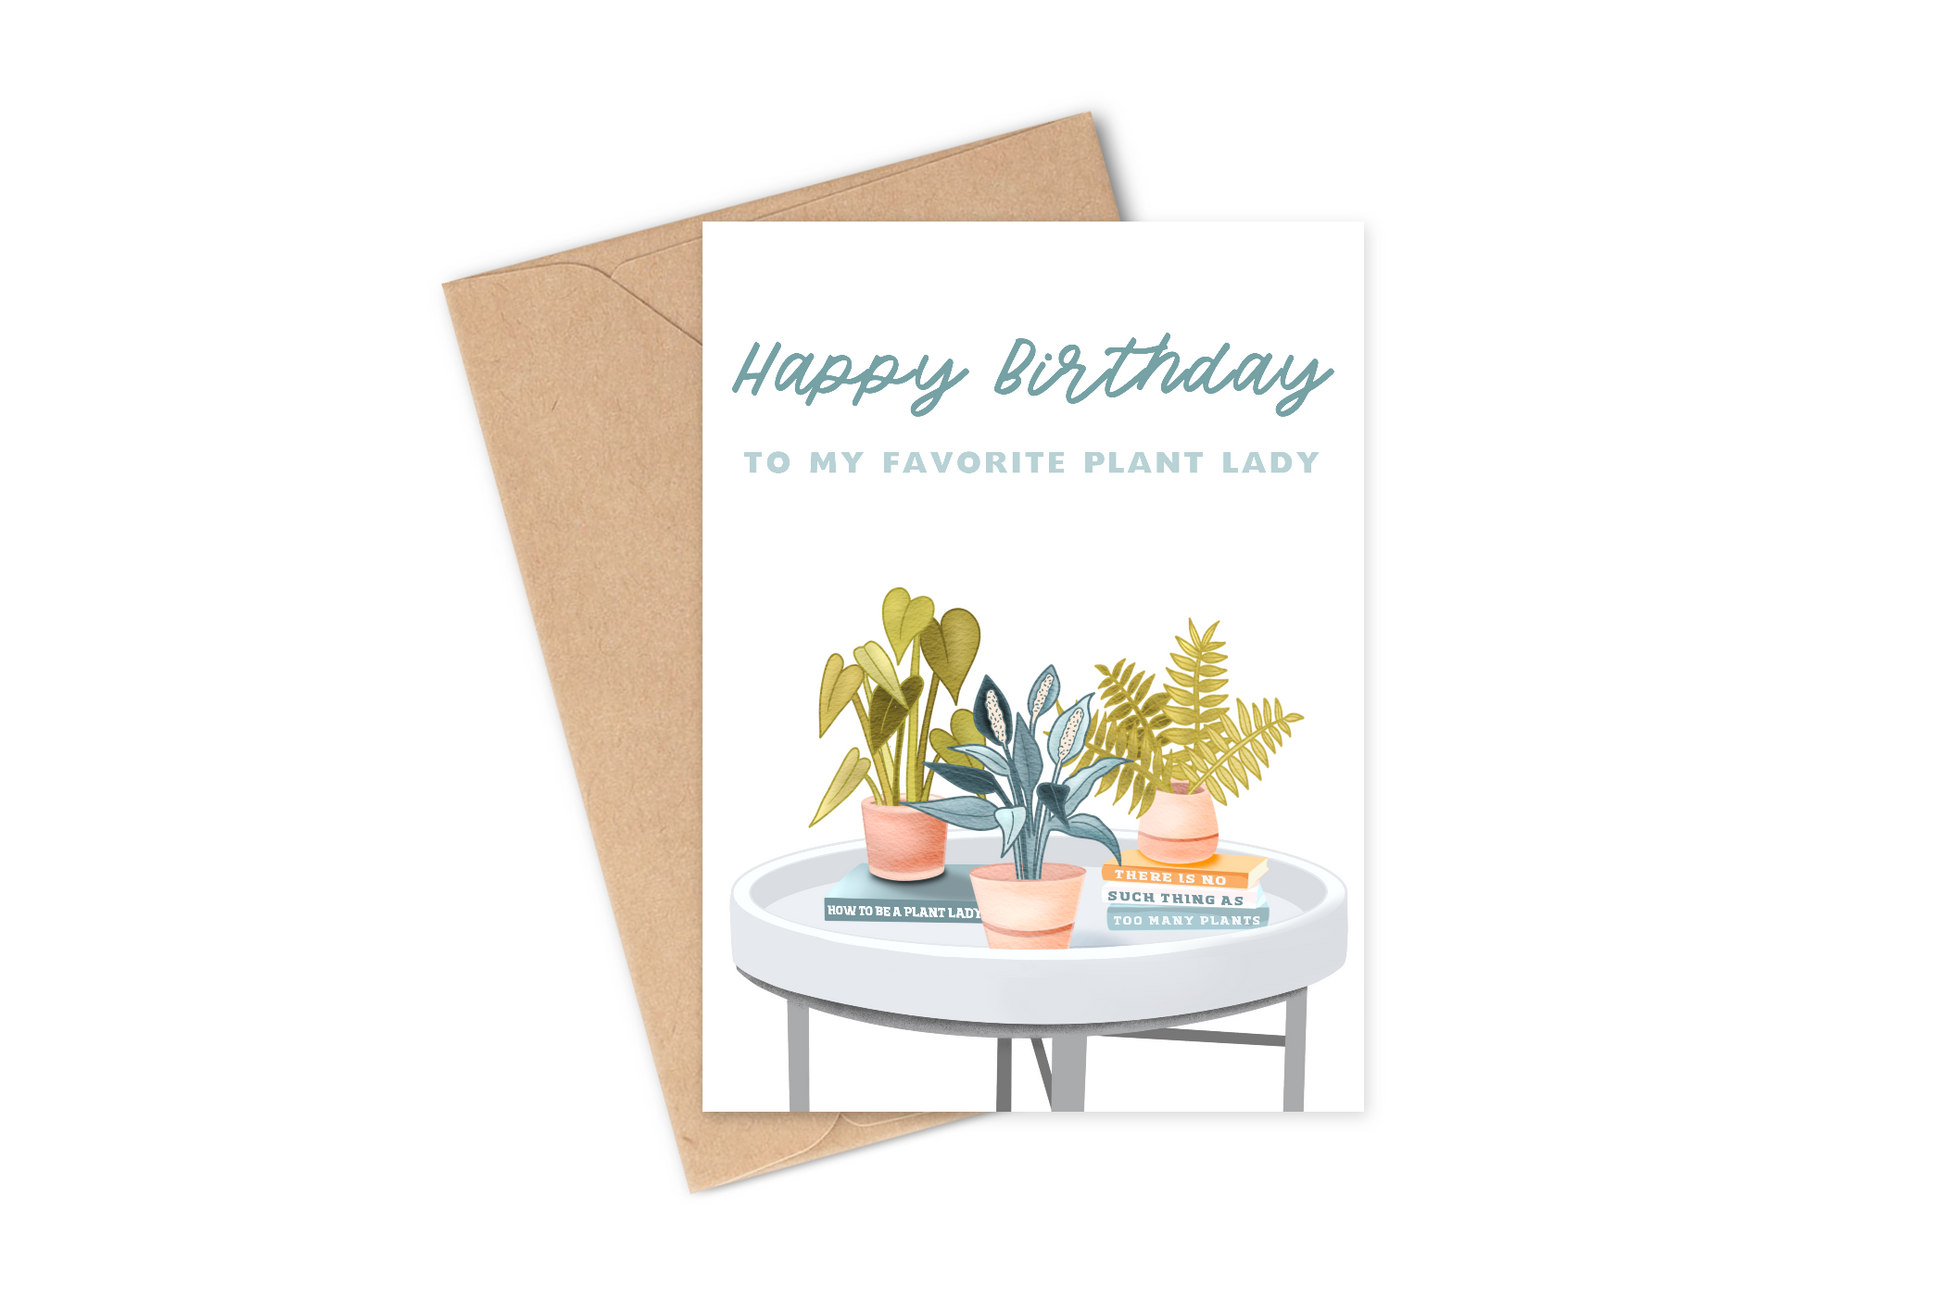 The perfect card for that plant lady in your life! I promise she will be thrilled to get this card on her special birthday.  gift for plant lover, green thumb gift, gardener birthday gift, plant lady funny greeting card hand illustrated.